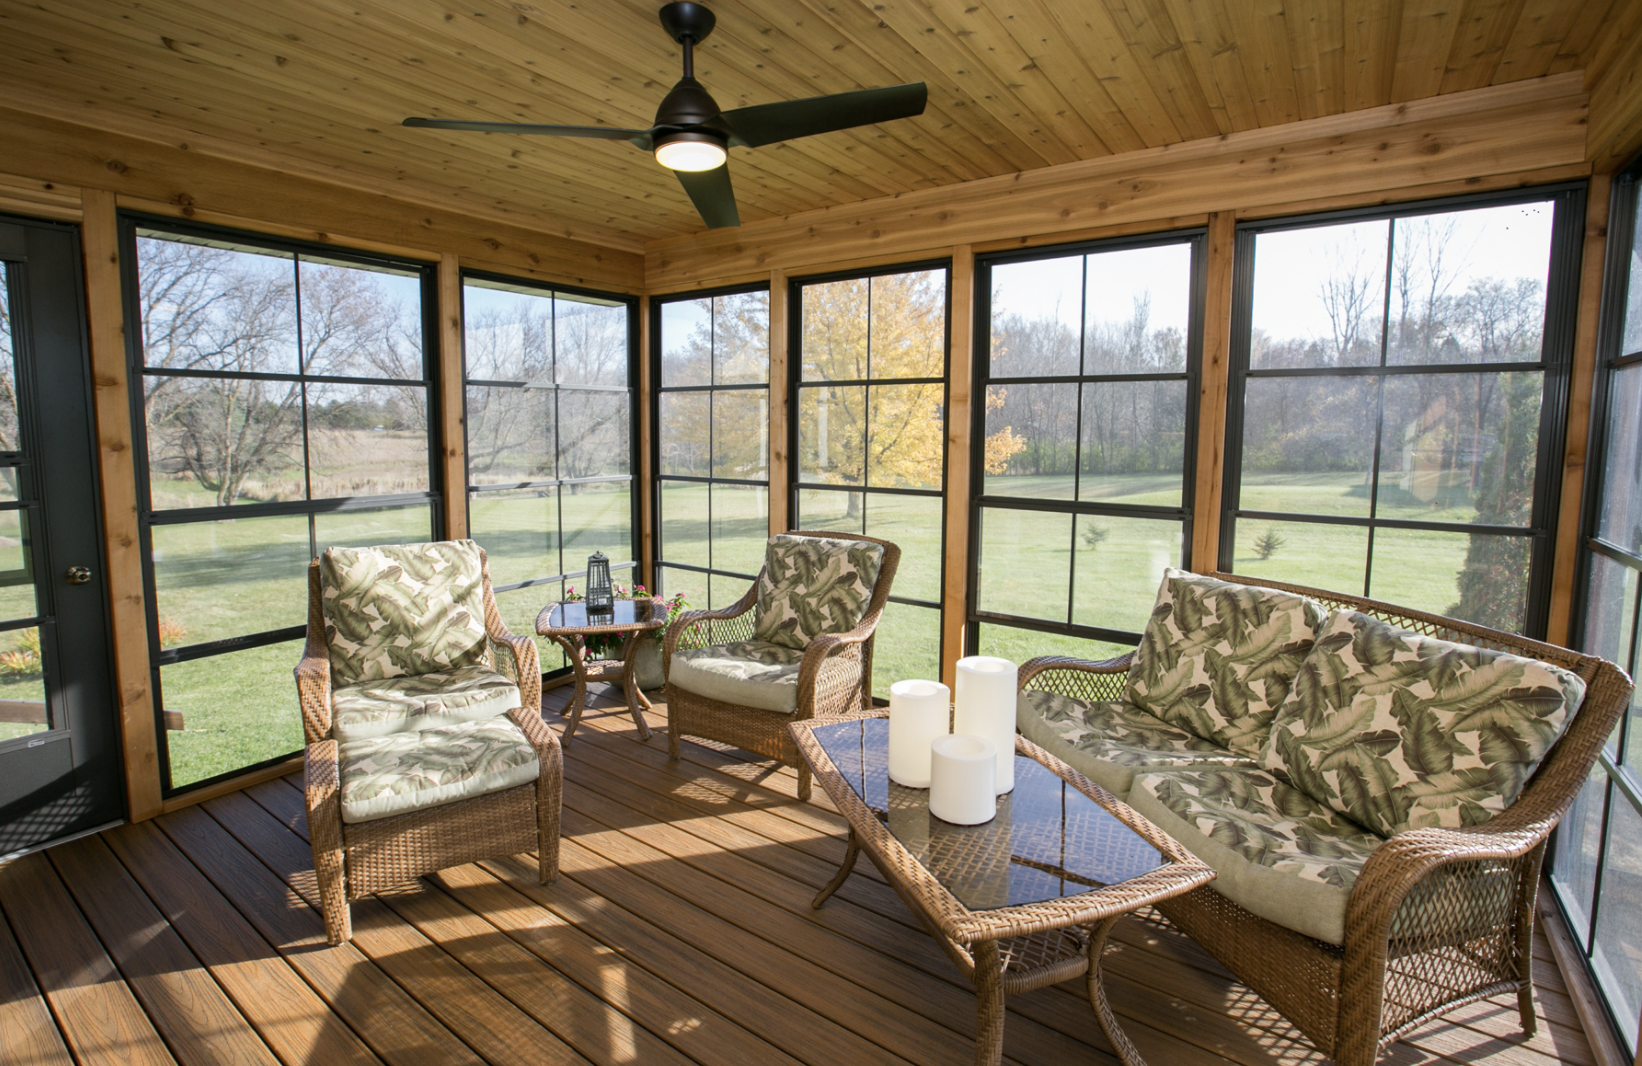 A sunroom or sun parlor is a place to relax and let the sun do the rest.